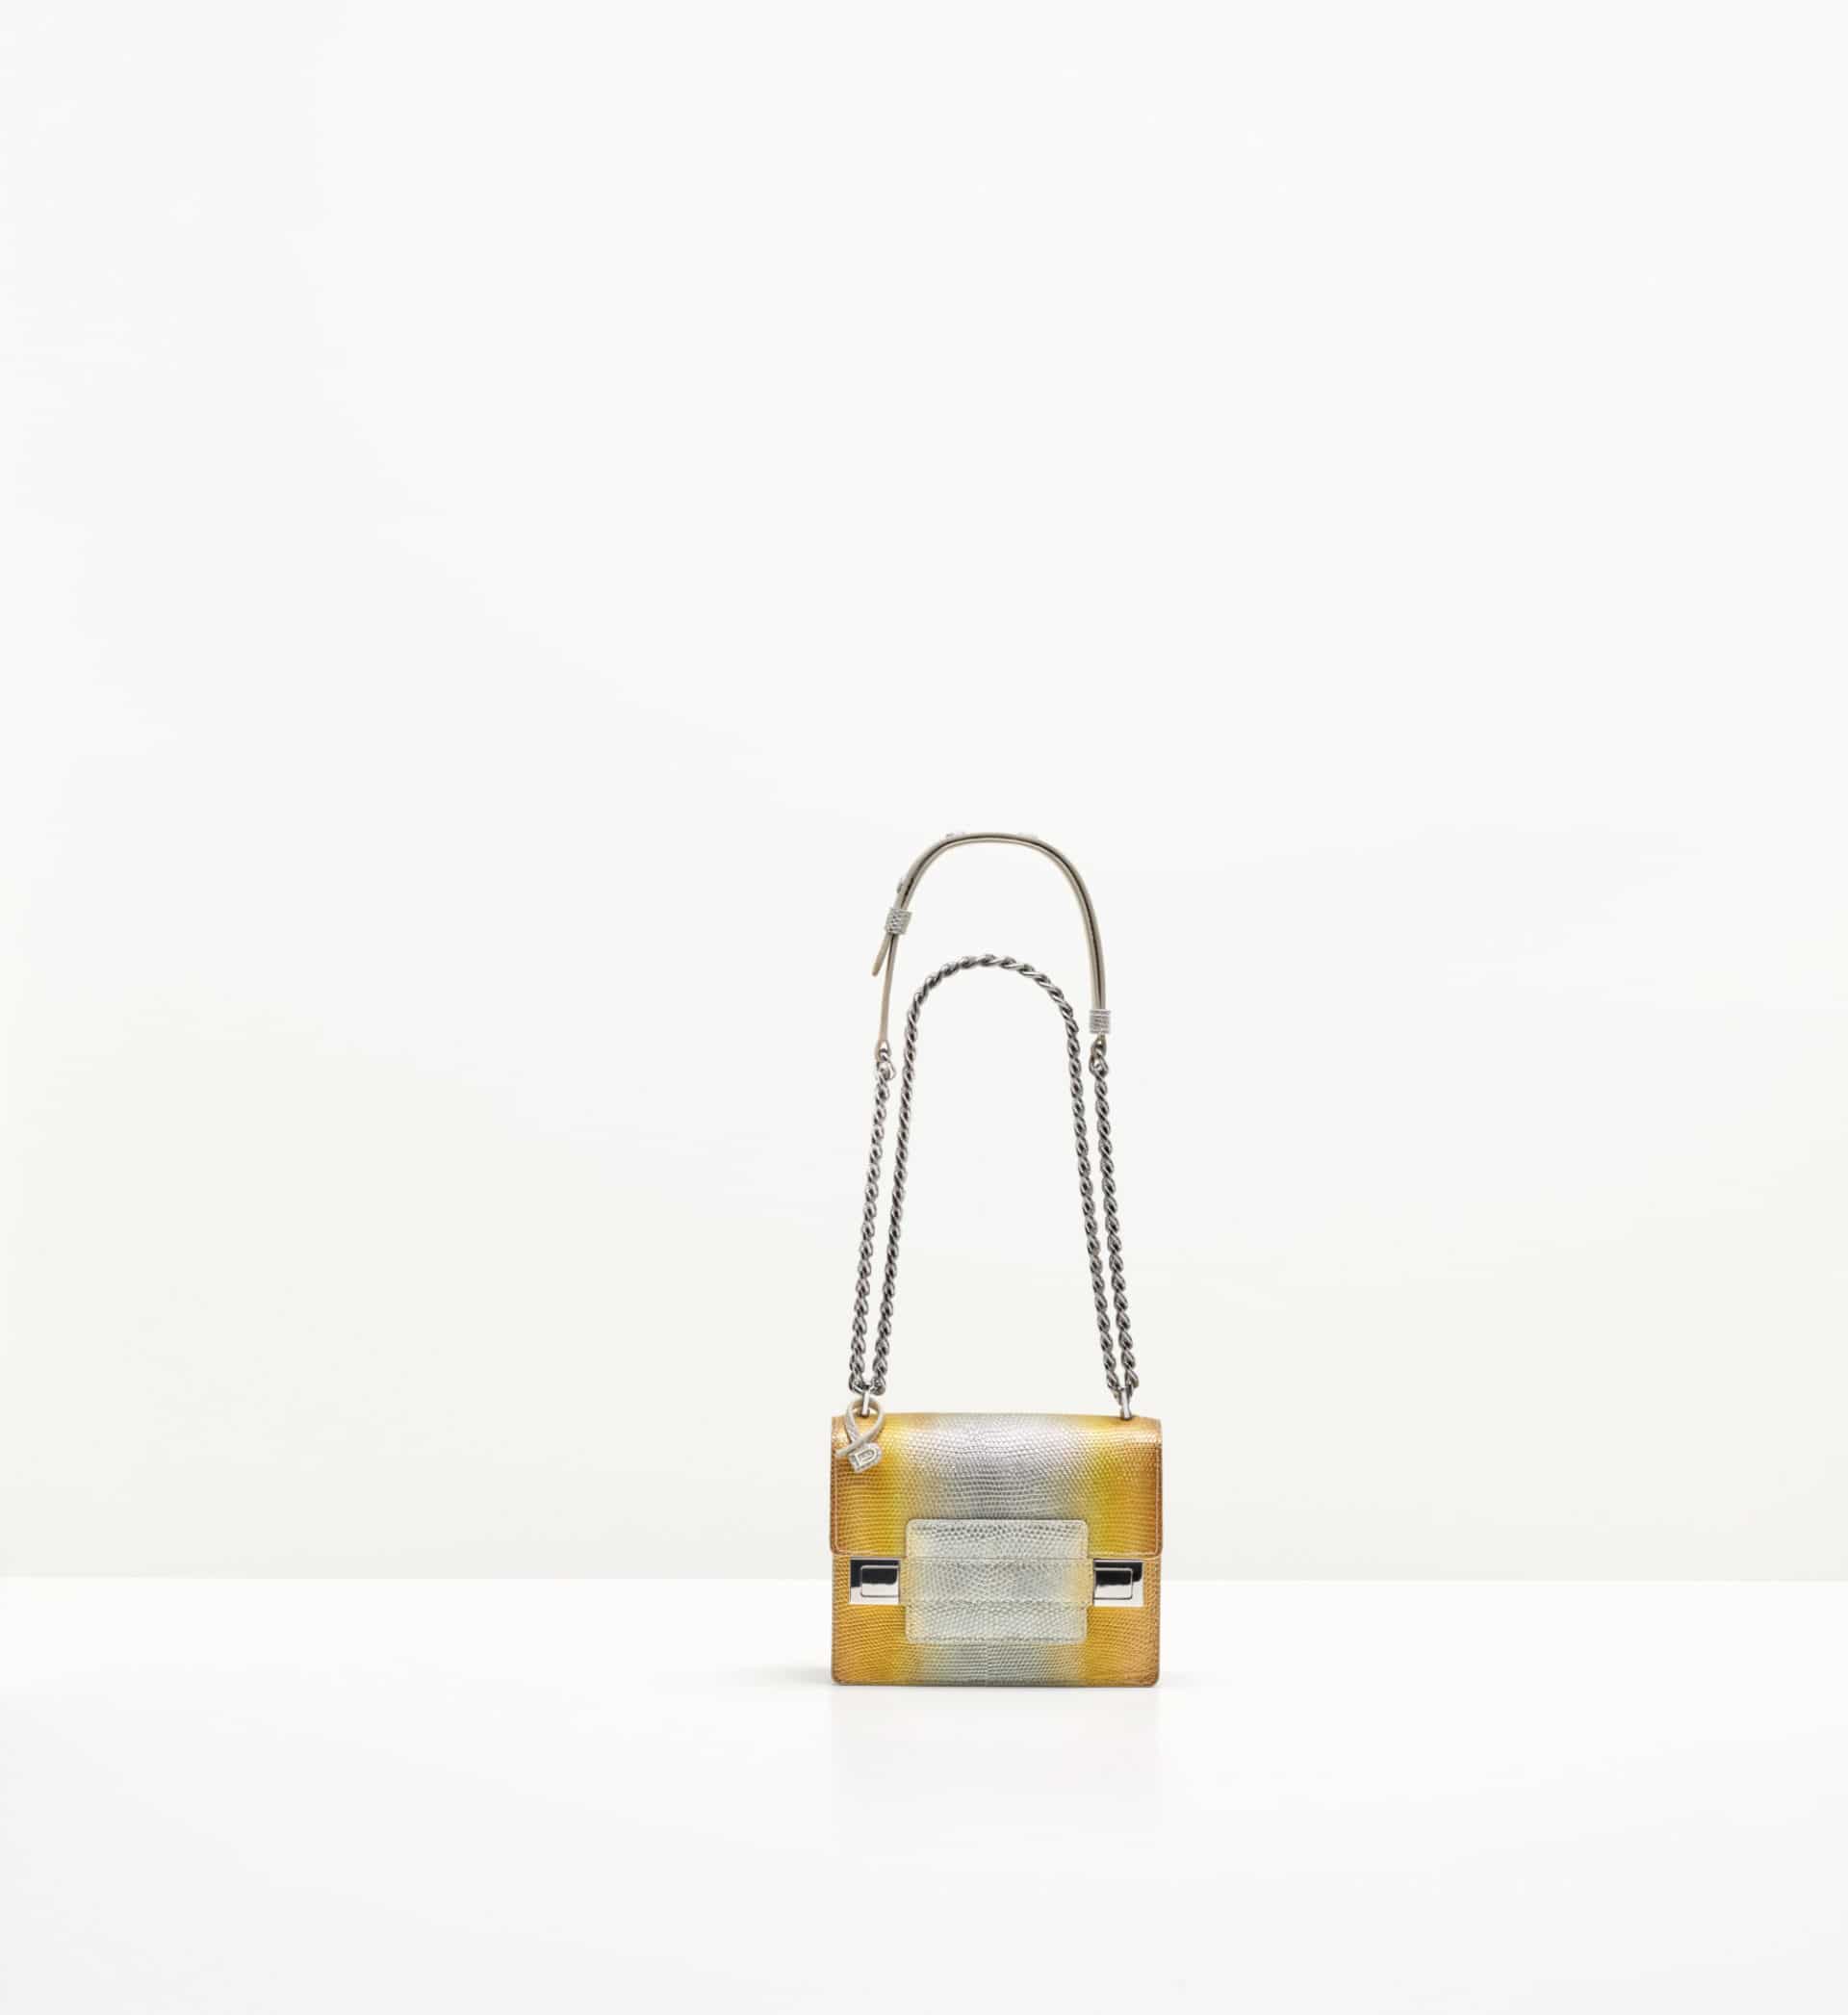 Delvaux - Our Spring Mini Bags Collection ticks all the right